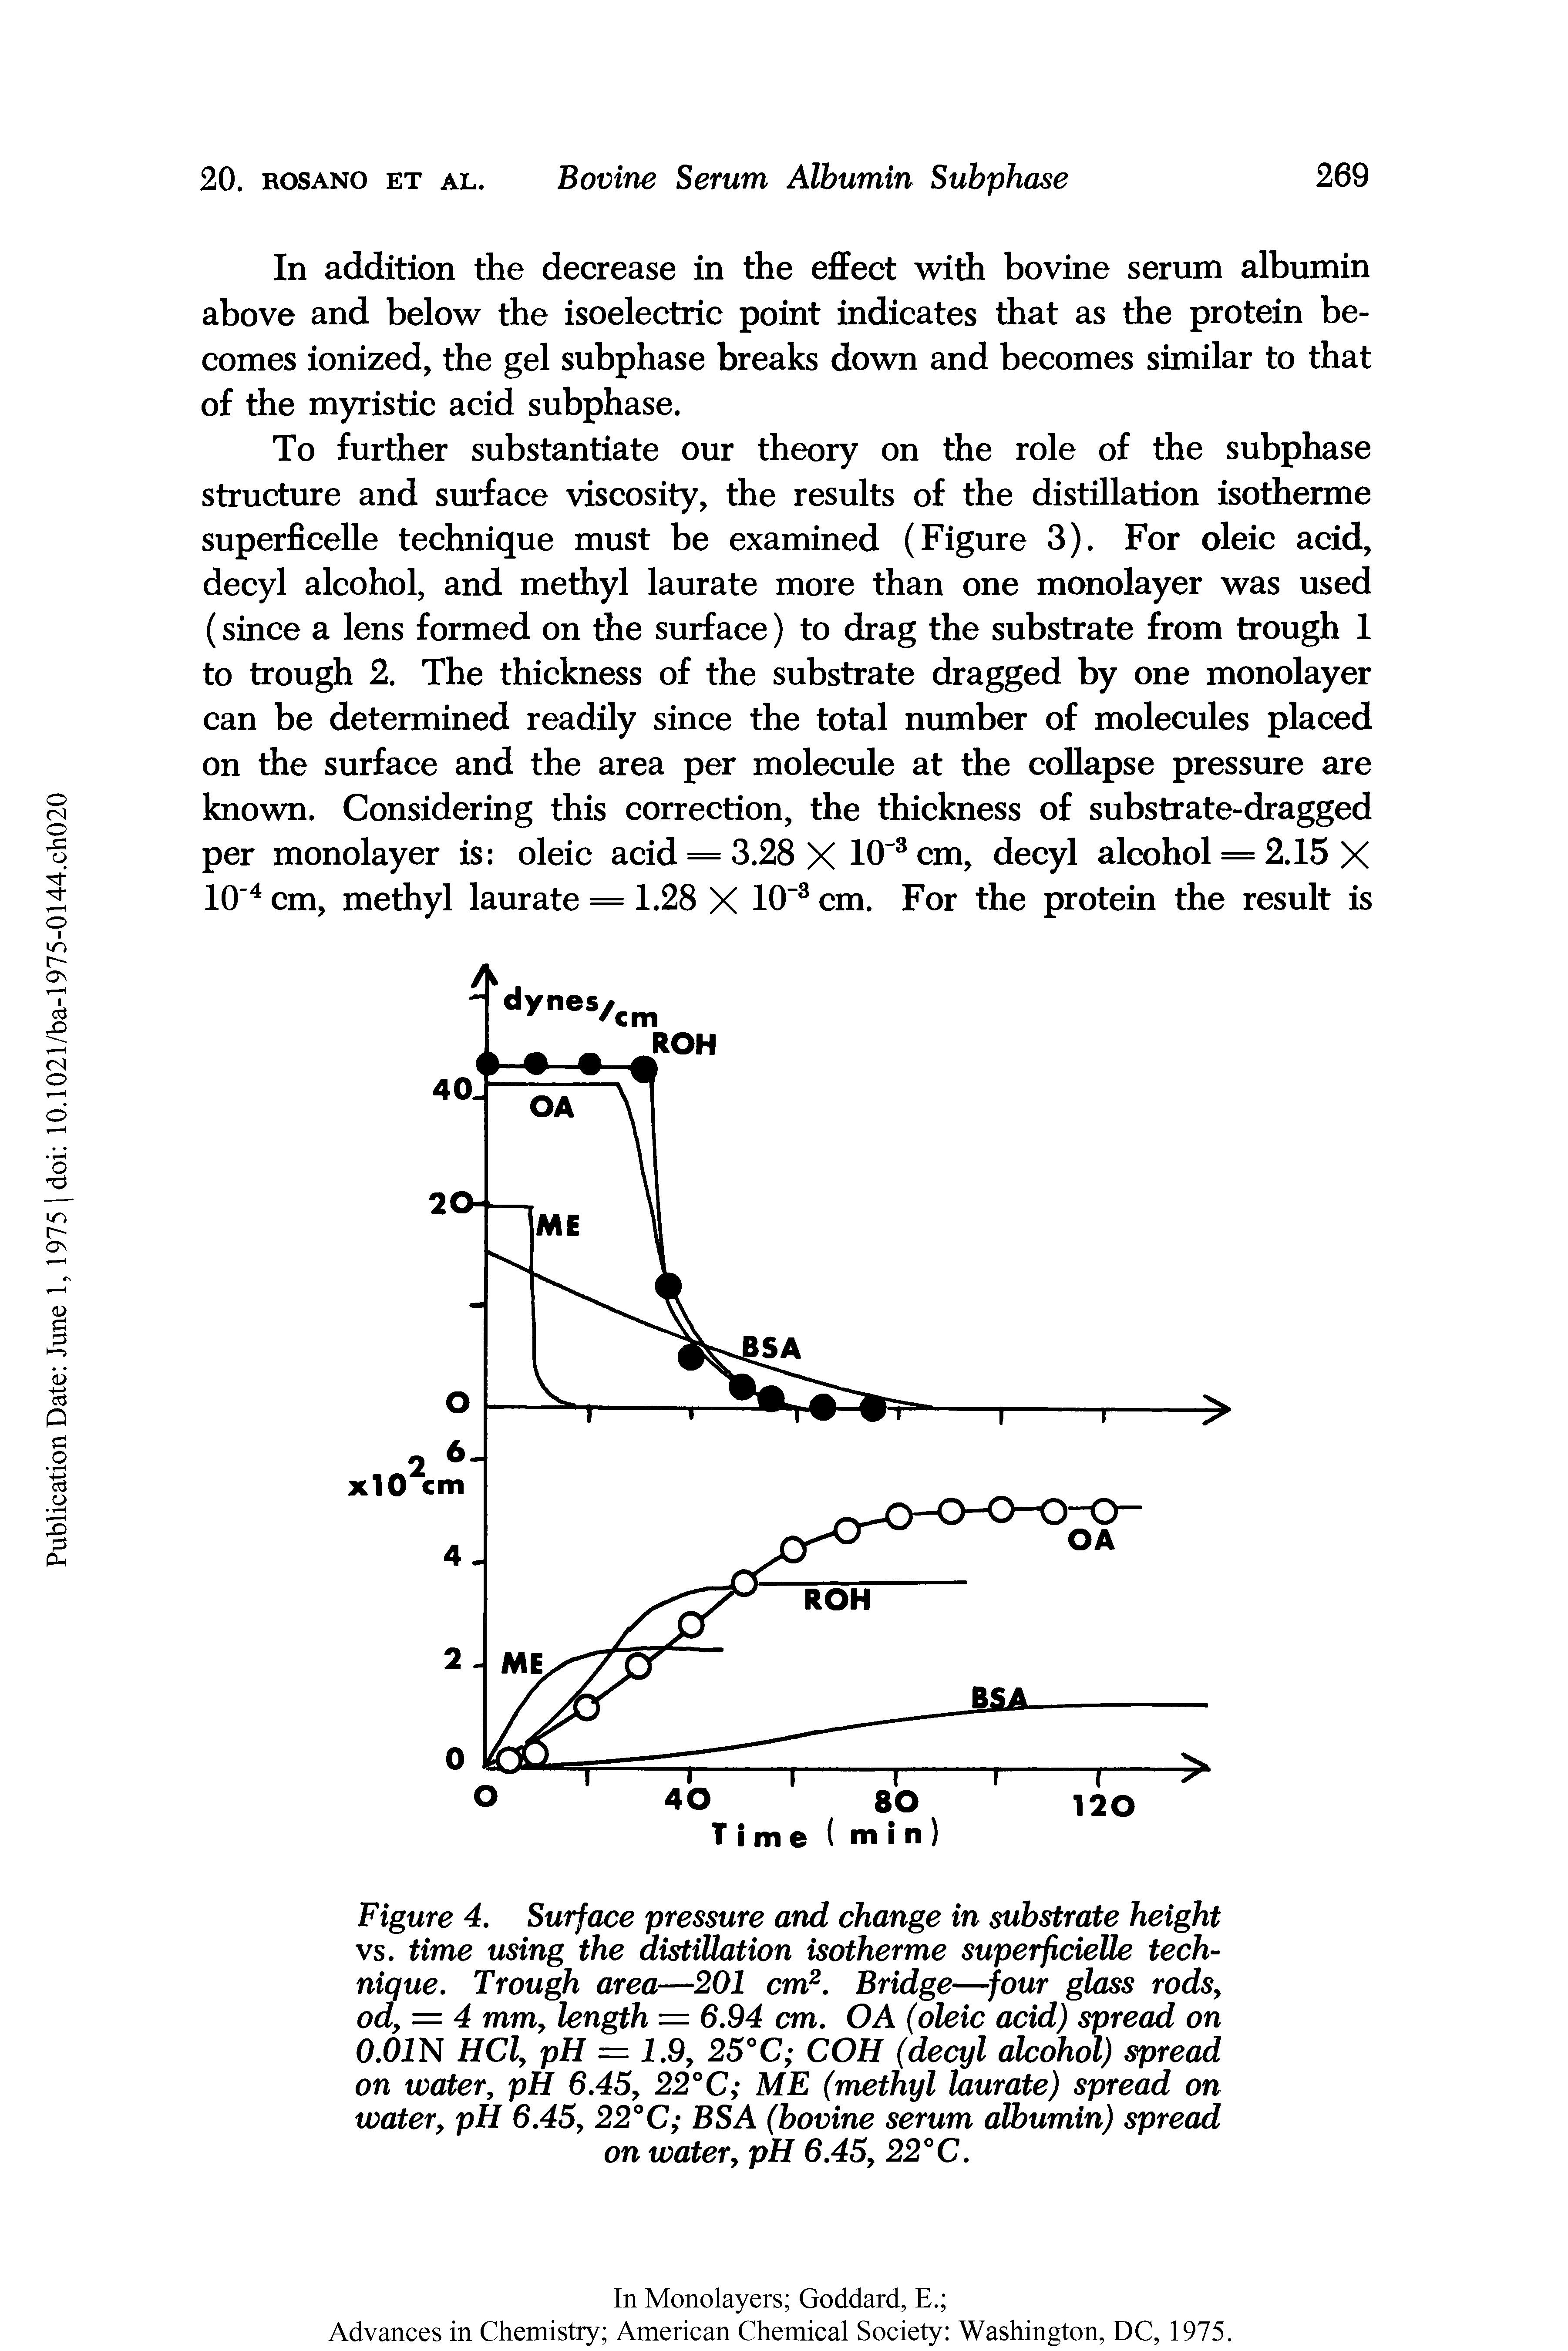 Figure 4. Surface pressure and change in substrate height vs. time using the distillation isotherme superficielle technique. Trough area—201 cm2. Bridge—four glass rods, ody = 4 mm, length = 6.94 cm. OA (oleic acid) spread on 0.01N HCly pH == 1.9, 25°C COH (decyl alcohol) spread on water, pH 6.45> 22°C ME (methyl laurate) spread on water, pH 6.45, 22°C BSA (bovine serum albumin) spread on water, pH 6.45, 22°C.